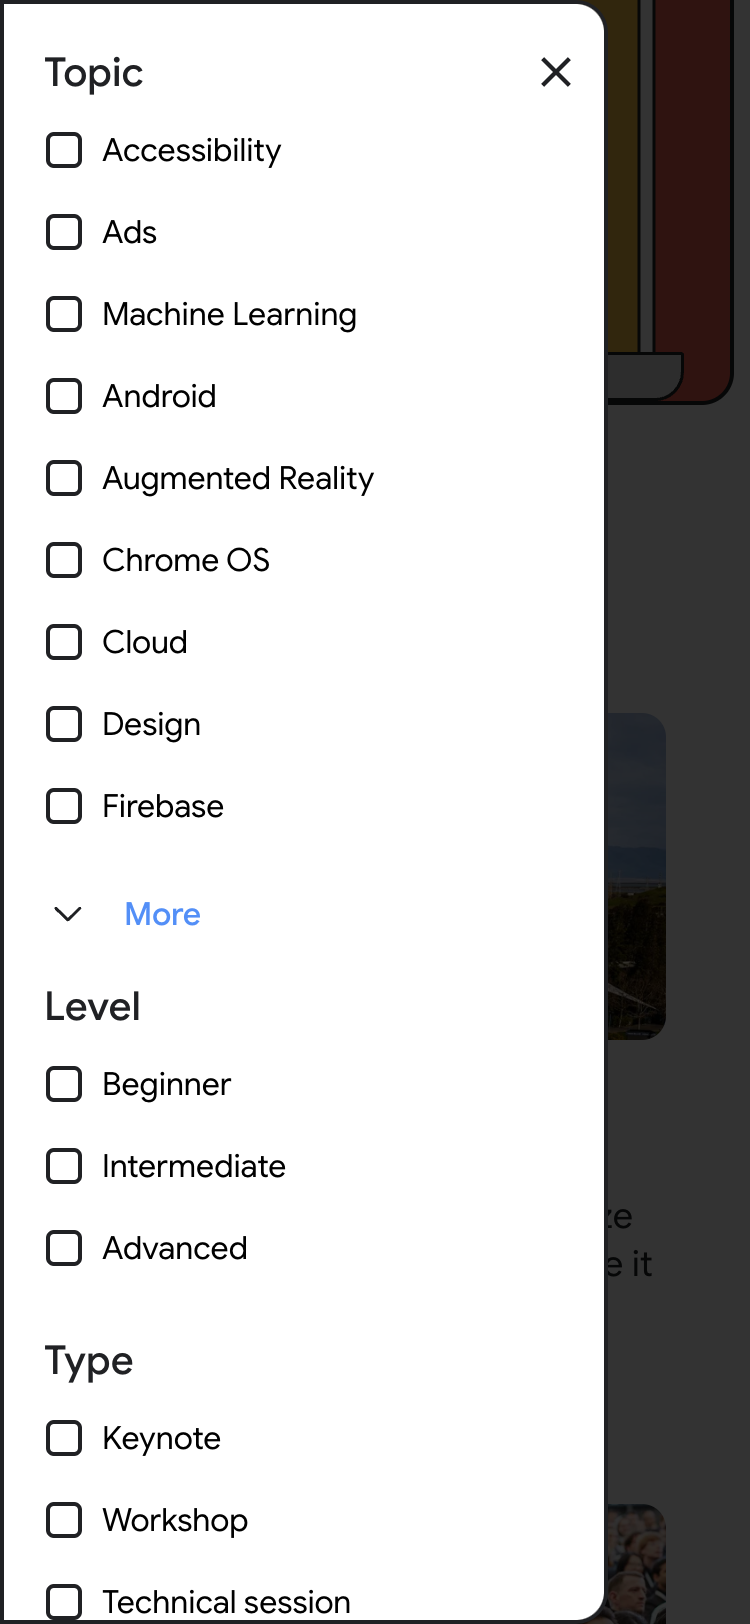 Mobile screenshot of the Google I/O 2022 program filters overlay. The overlay contains a list of filters such as 'Topic' and 'Level'. Each filter has a list of checkboxes.